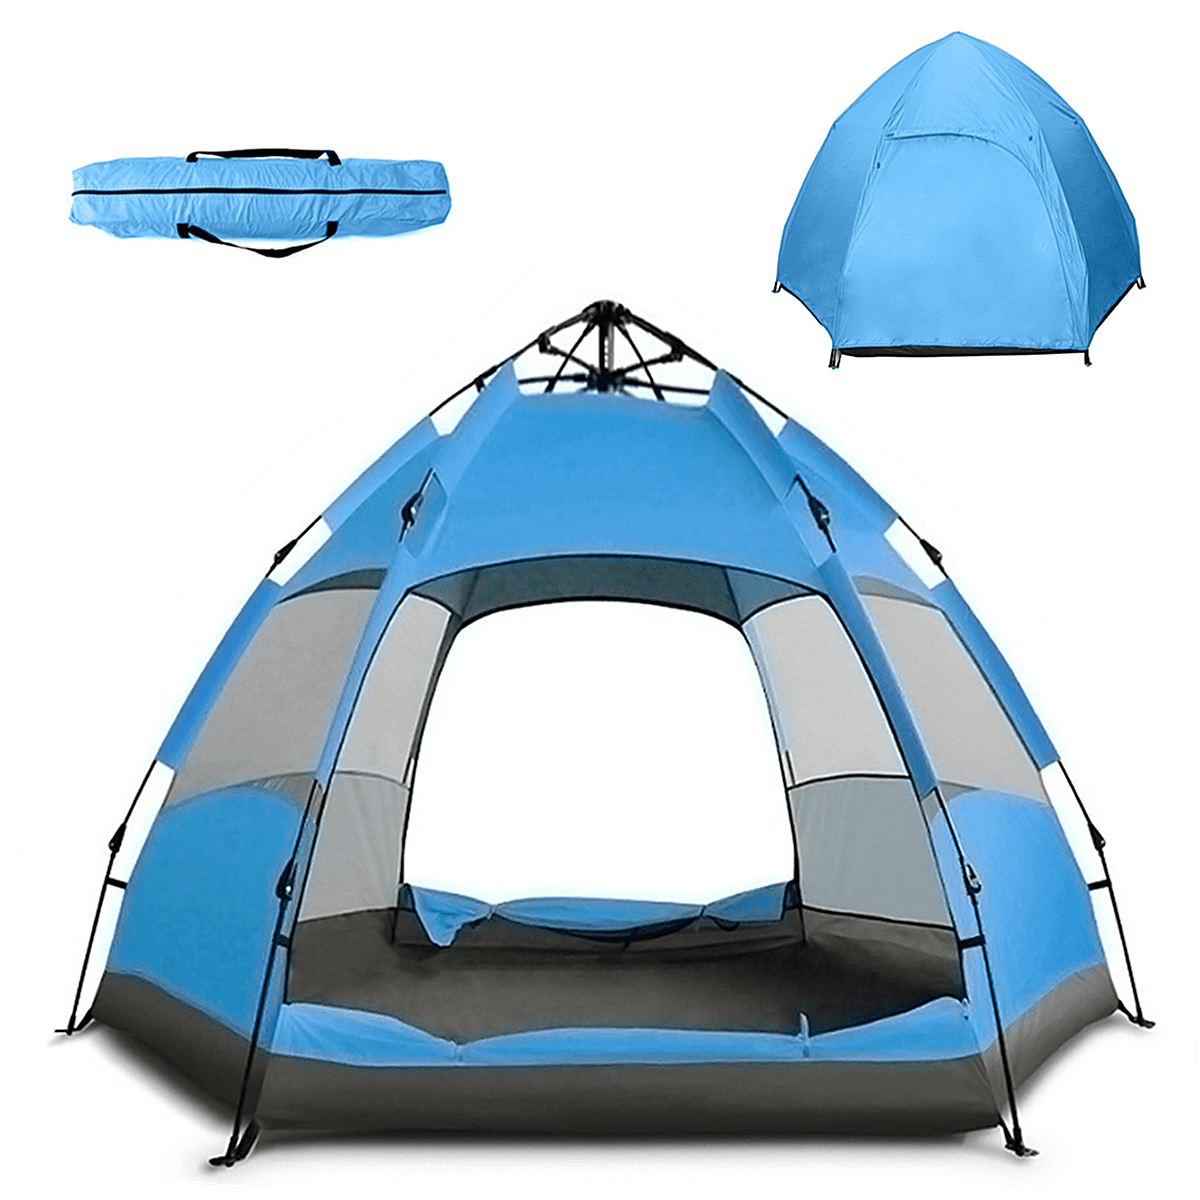 4 Person Double Layer Tent 1500mm waterproof rating Camping Festival Weekend 